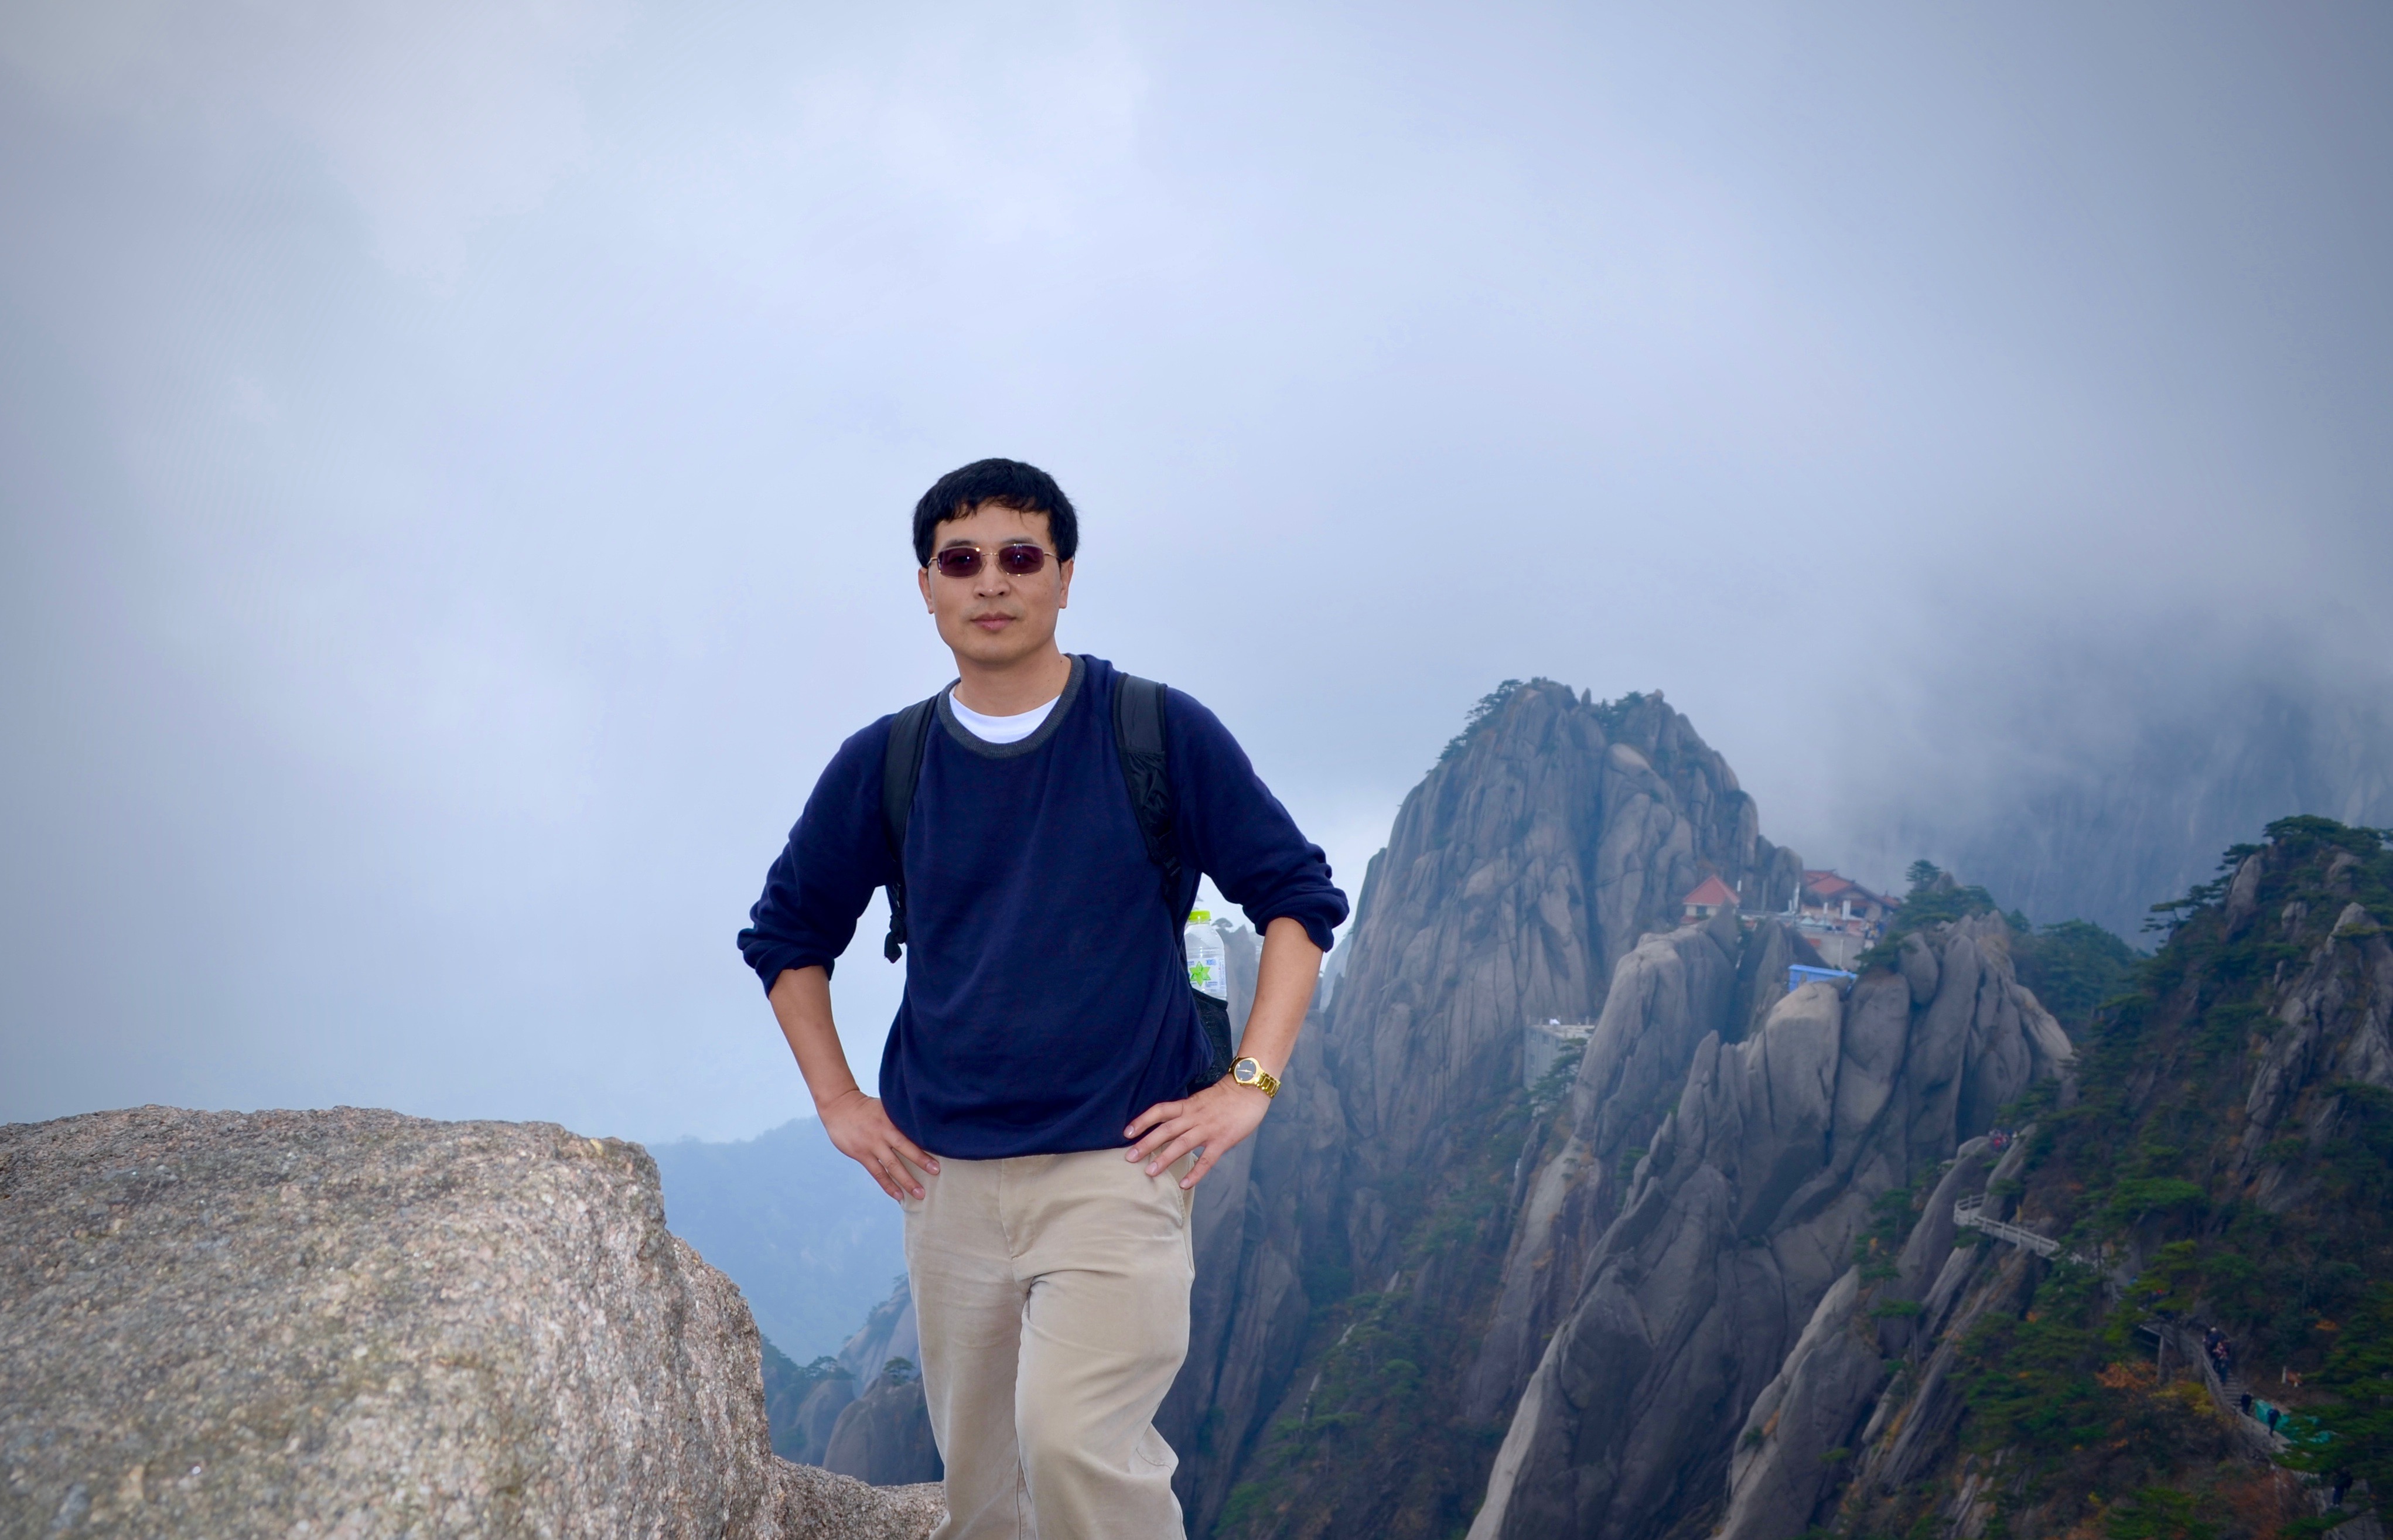 Shaocheng Xie, ARM’s value-added products and translators lead, poses during a trek up Mount Huangshan in his native China.